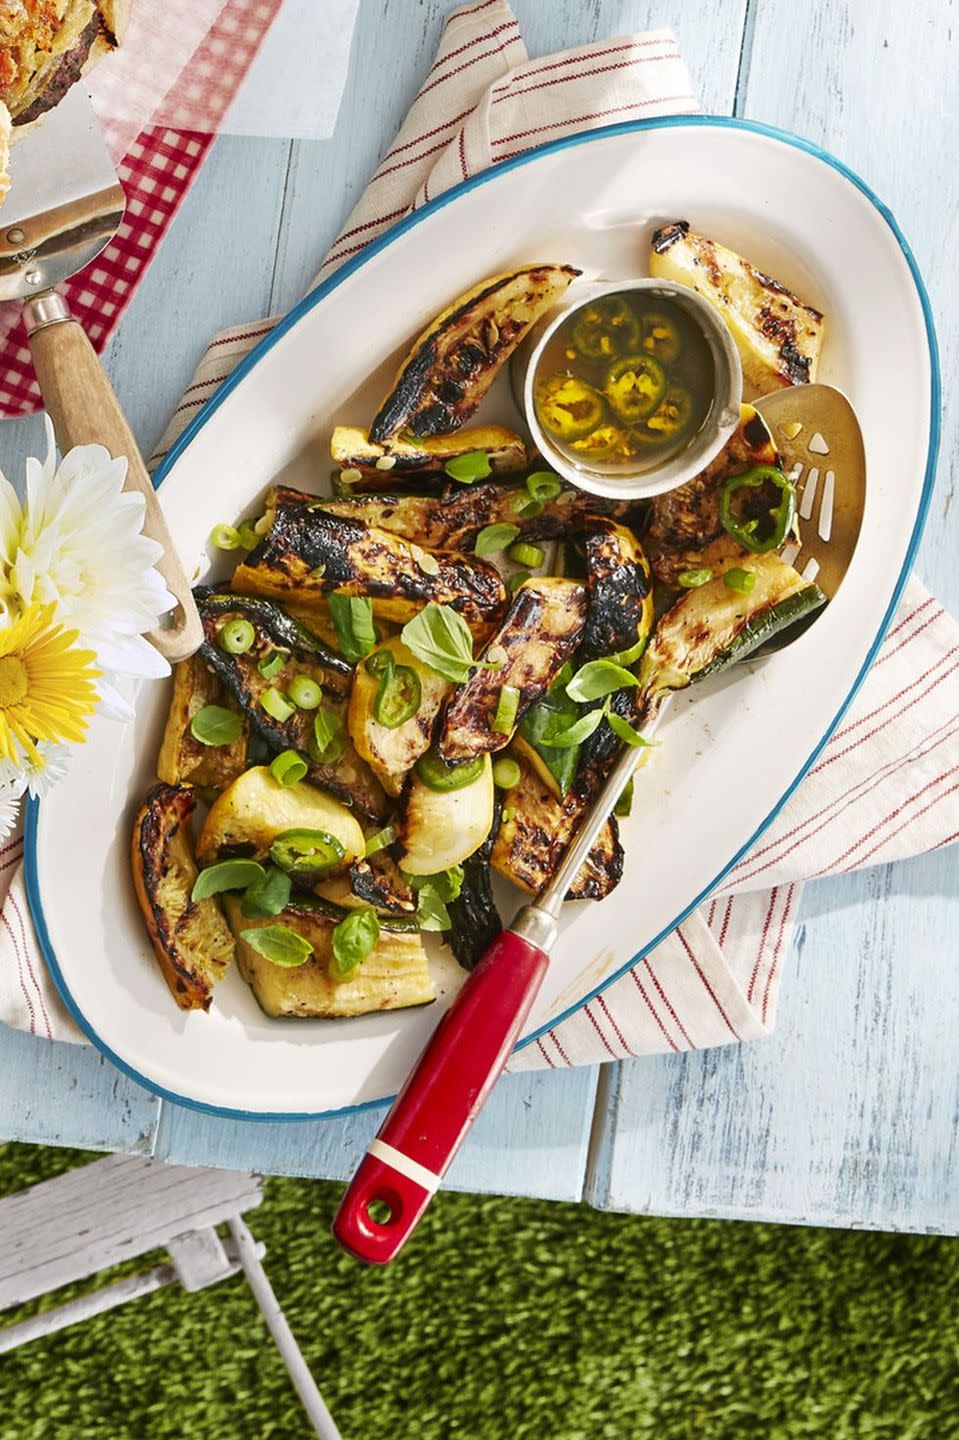 Grilled Zucchini and Yellow Squash With Lemon-Scallion Dressing